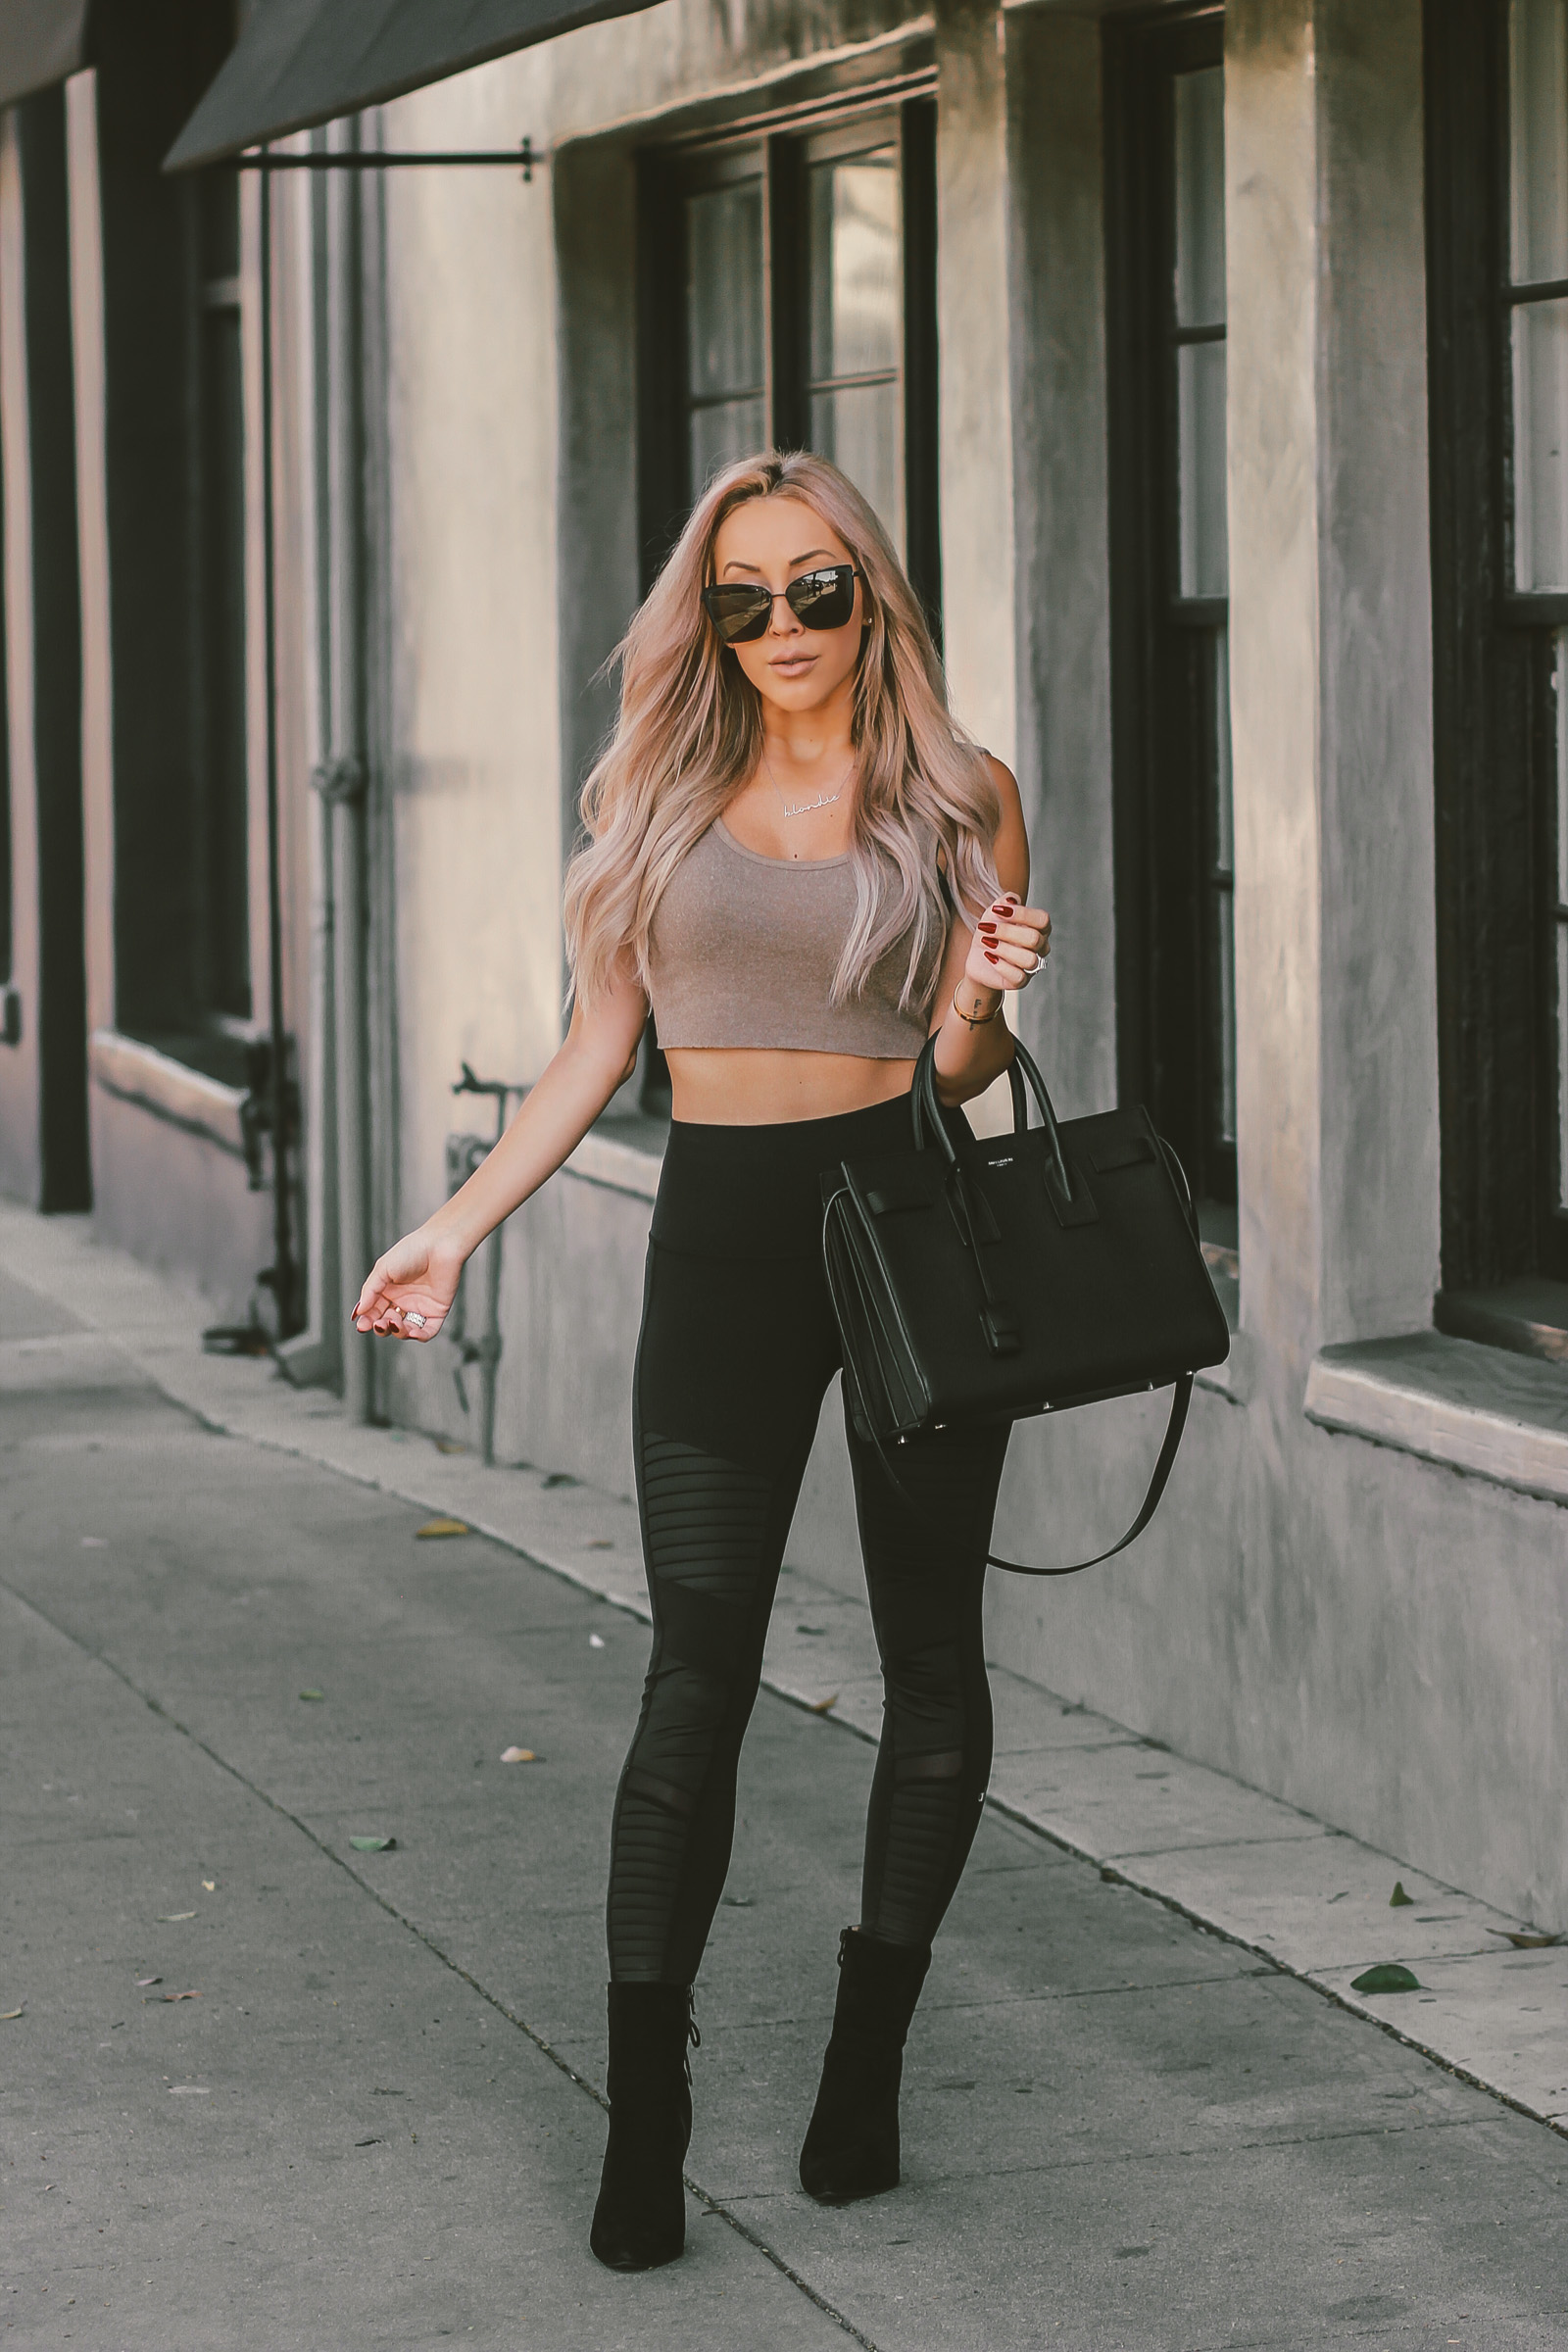 How To Style Your Yoga Outfit & Wear It Out | All Yoga | Moto Leggings | Saint Laurent Sac De Jour | Diff Eyewear | Blondie in the City by Hayley Larue